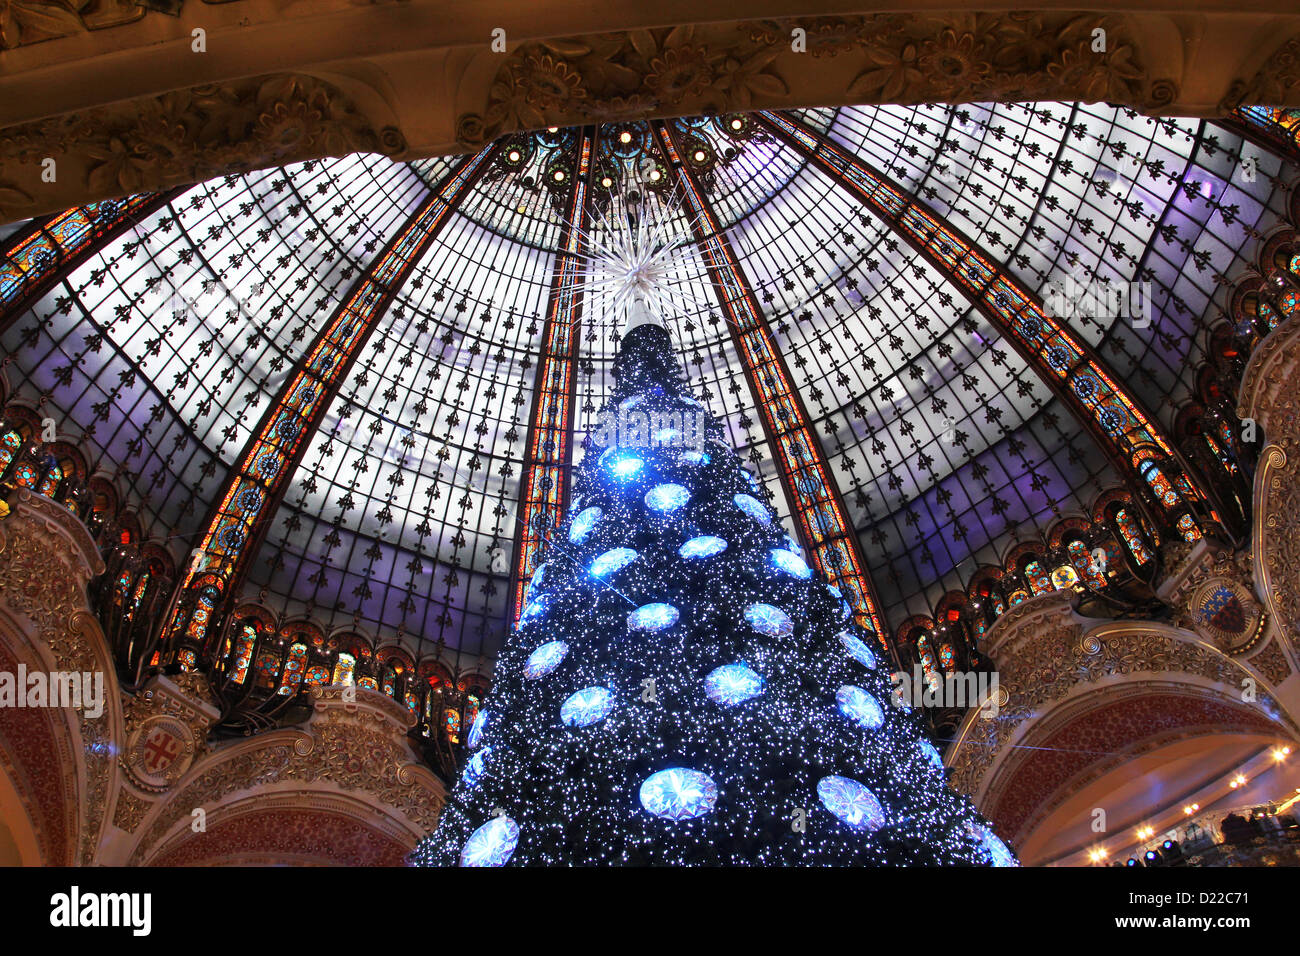 Galleries Lafayette Christmas Tree High Resolution Stock Photography and  Images - Alamy